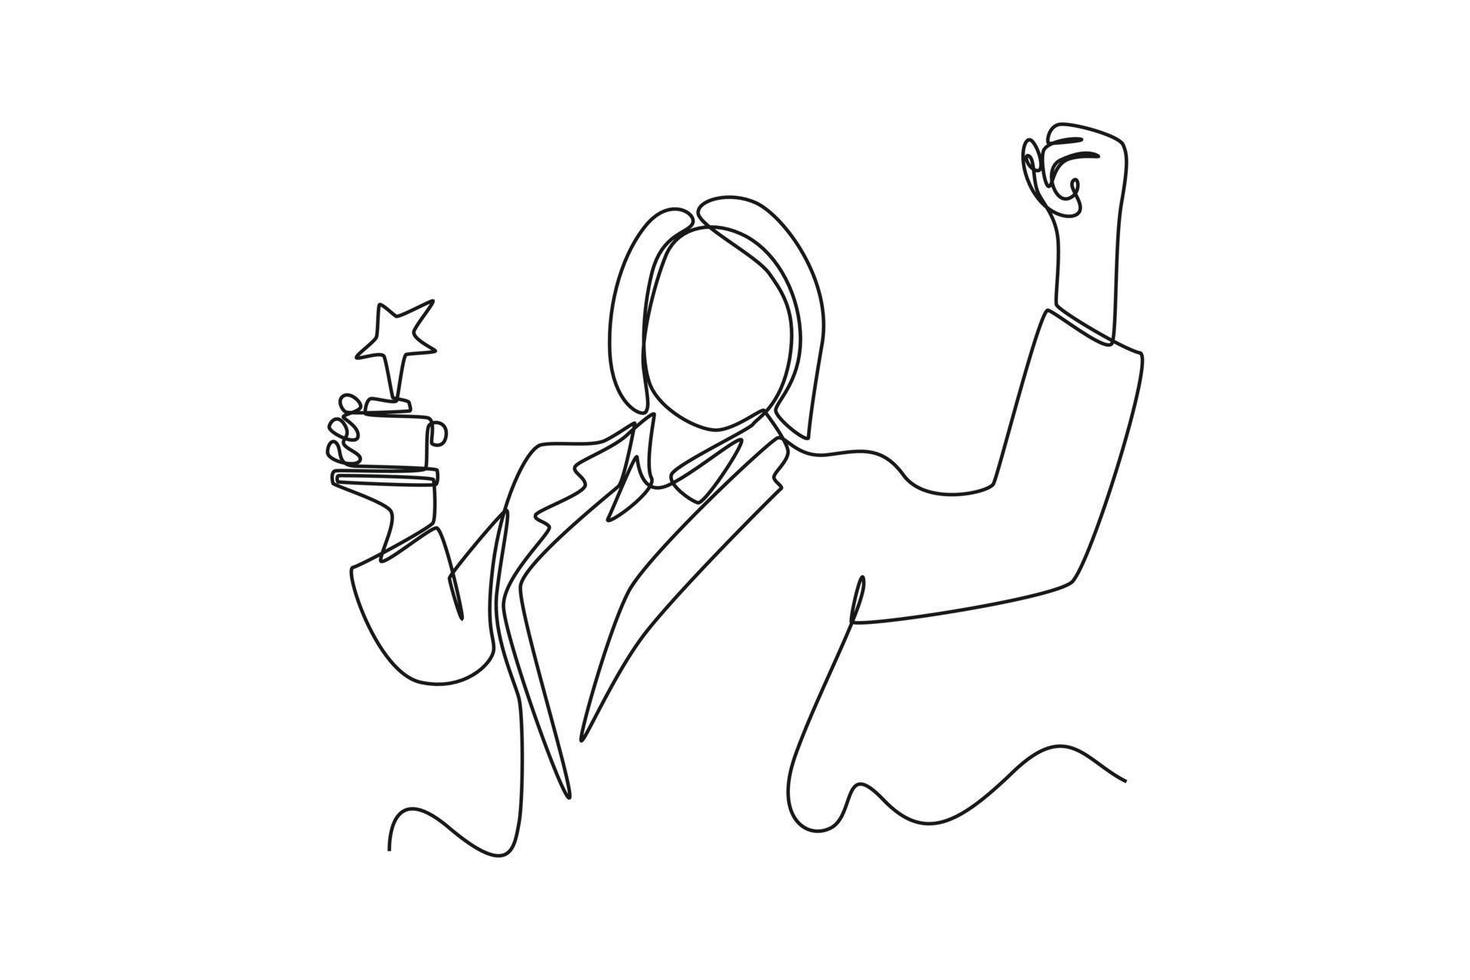 Single one line drawing female employee getting trophy from her office . Employee appreciation day concept. Continuous line draw design graphic vector illustration.